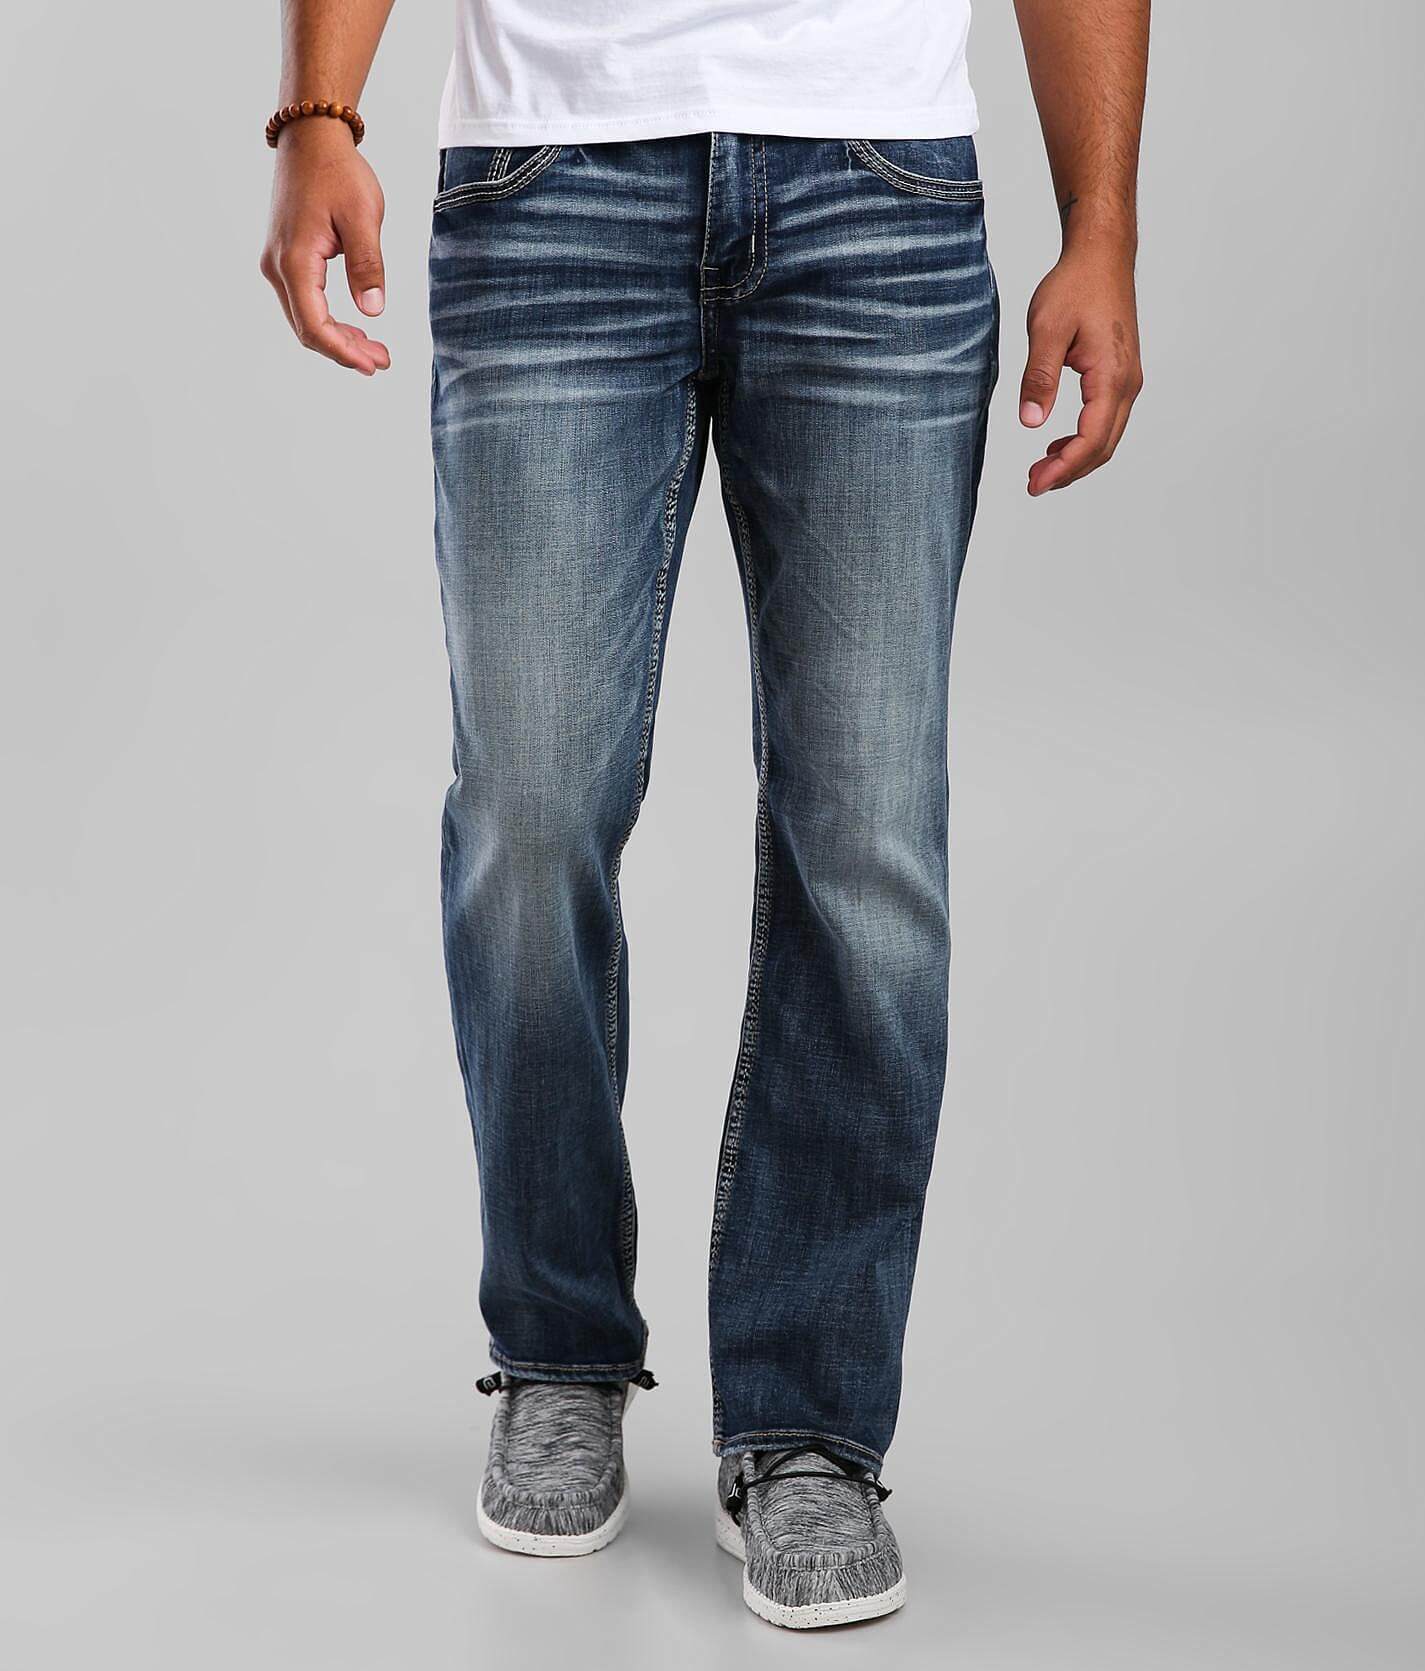 buckle jeans canada